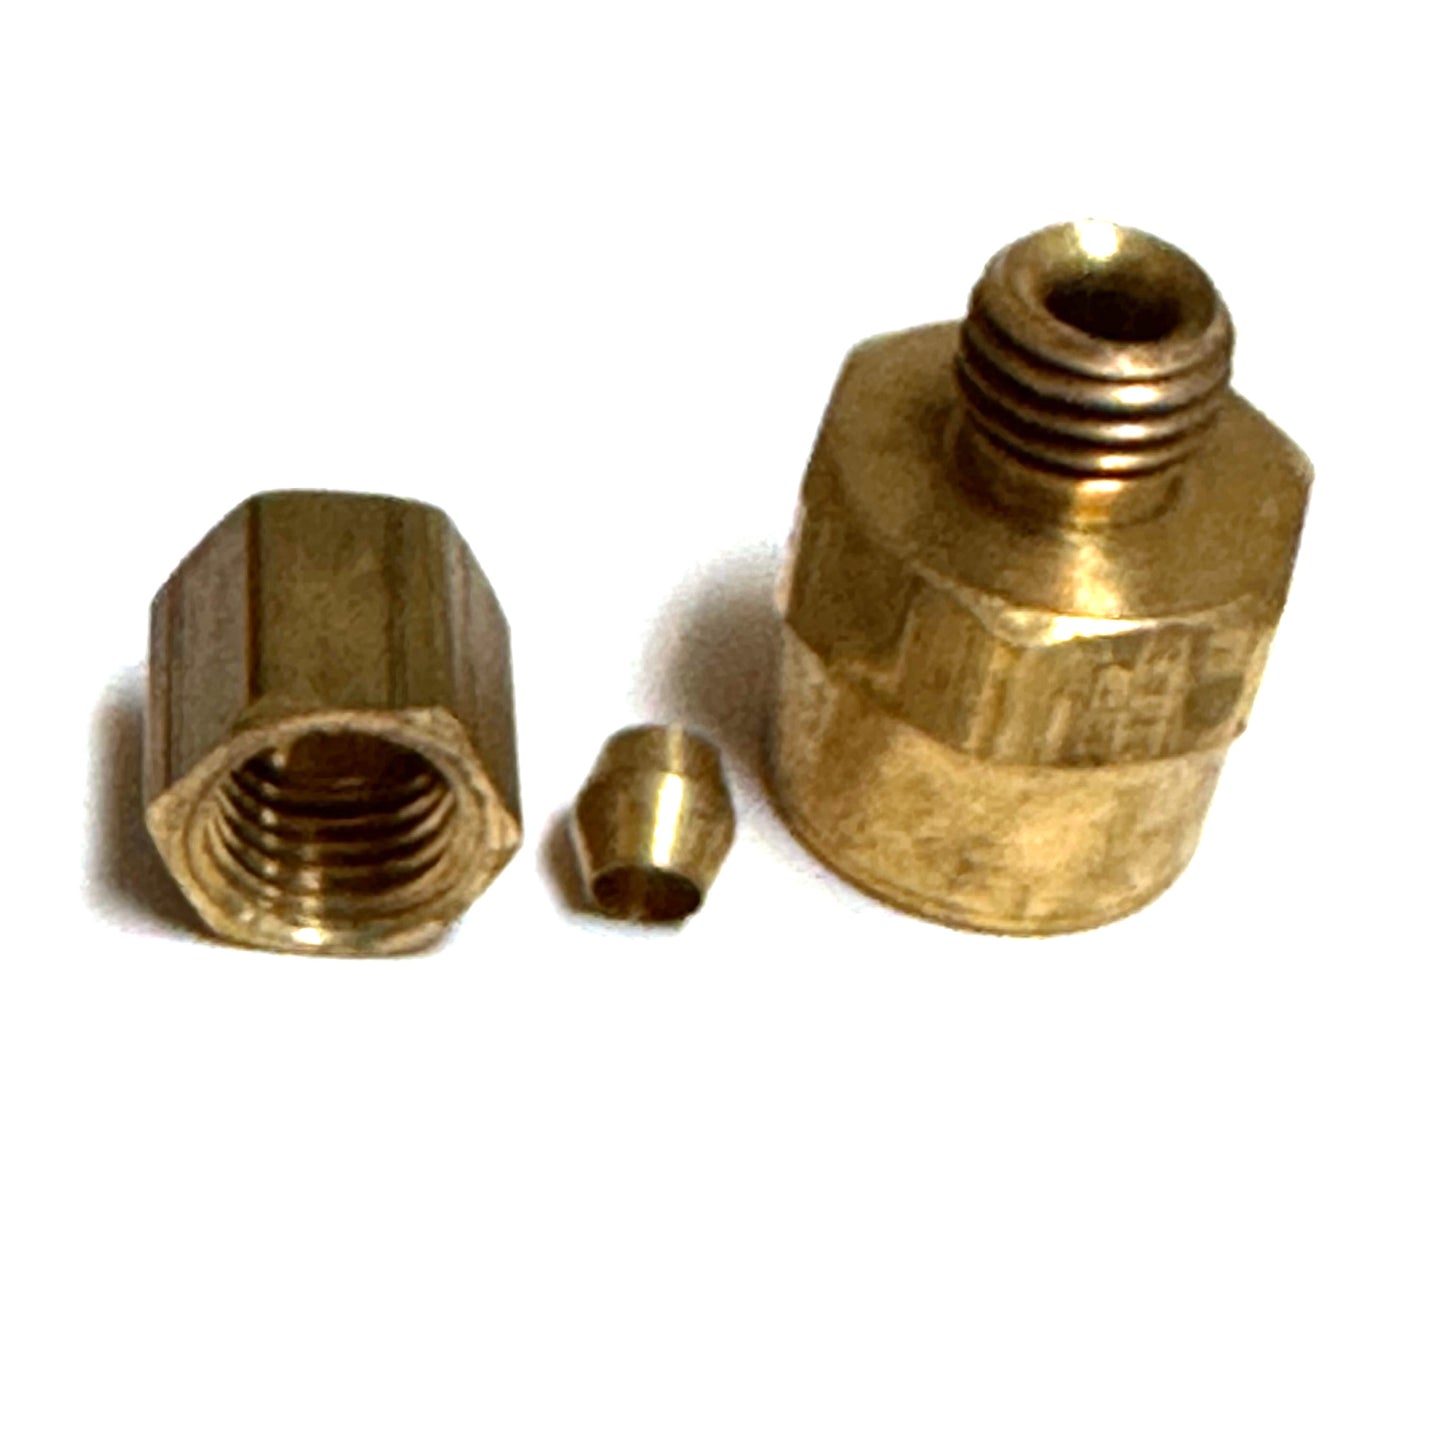 Compression Fitting for Mechanical Boost Gauges that use 1/8" OD nylon-type hose